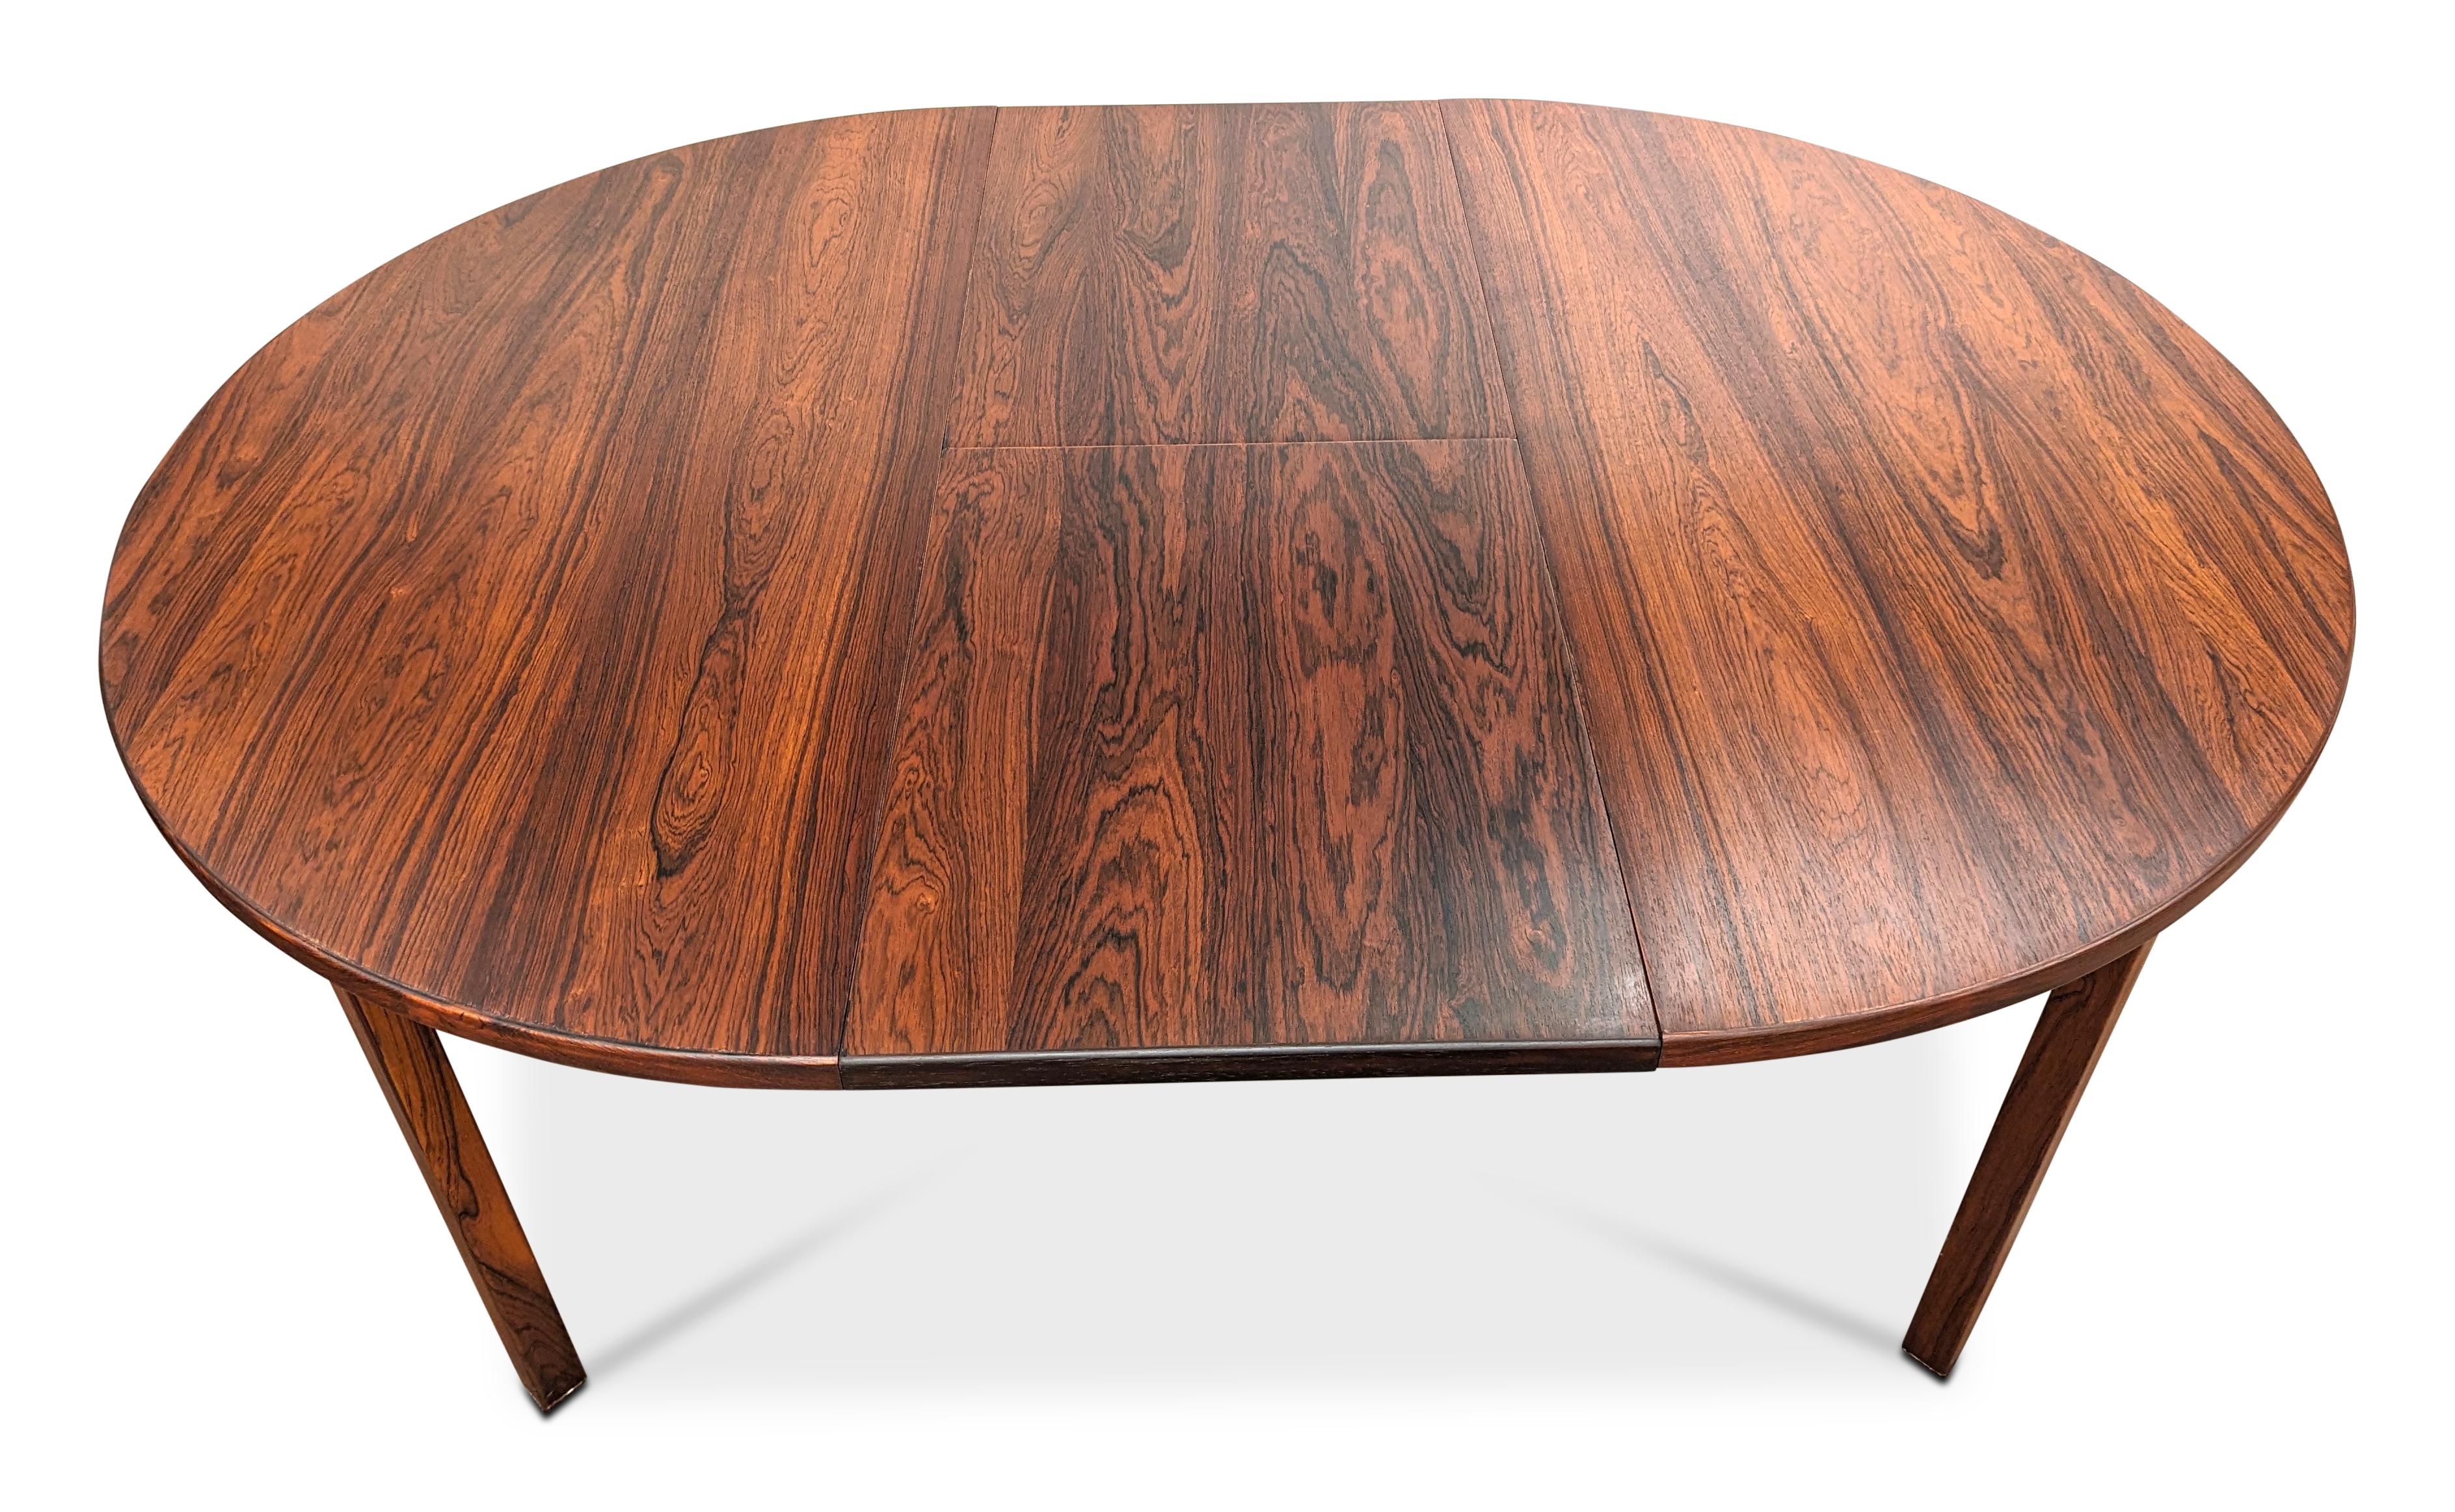 Round Rosewood Table w 2 Butterfly Leaves - 022435 Vintage Danish Modern 1